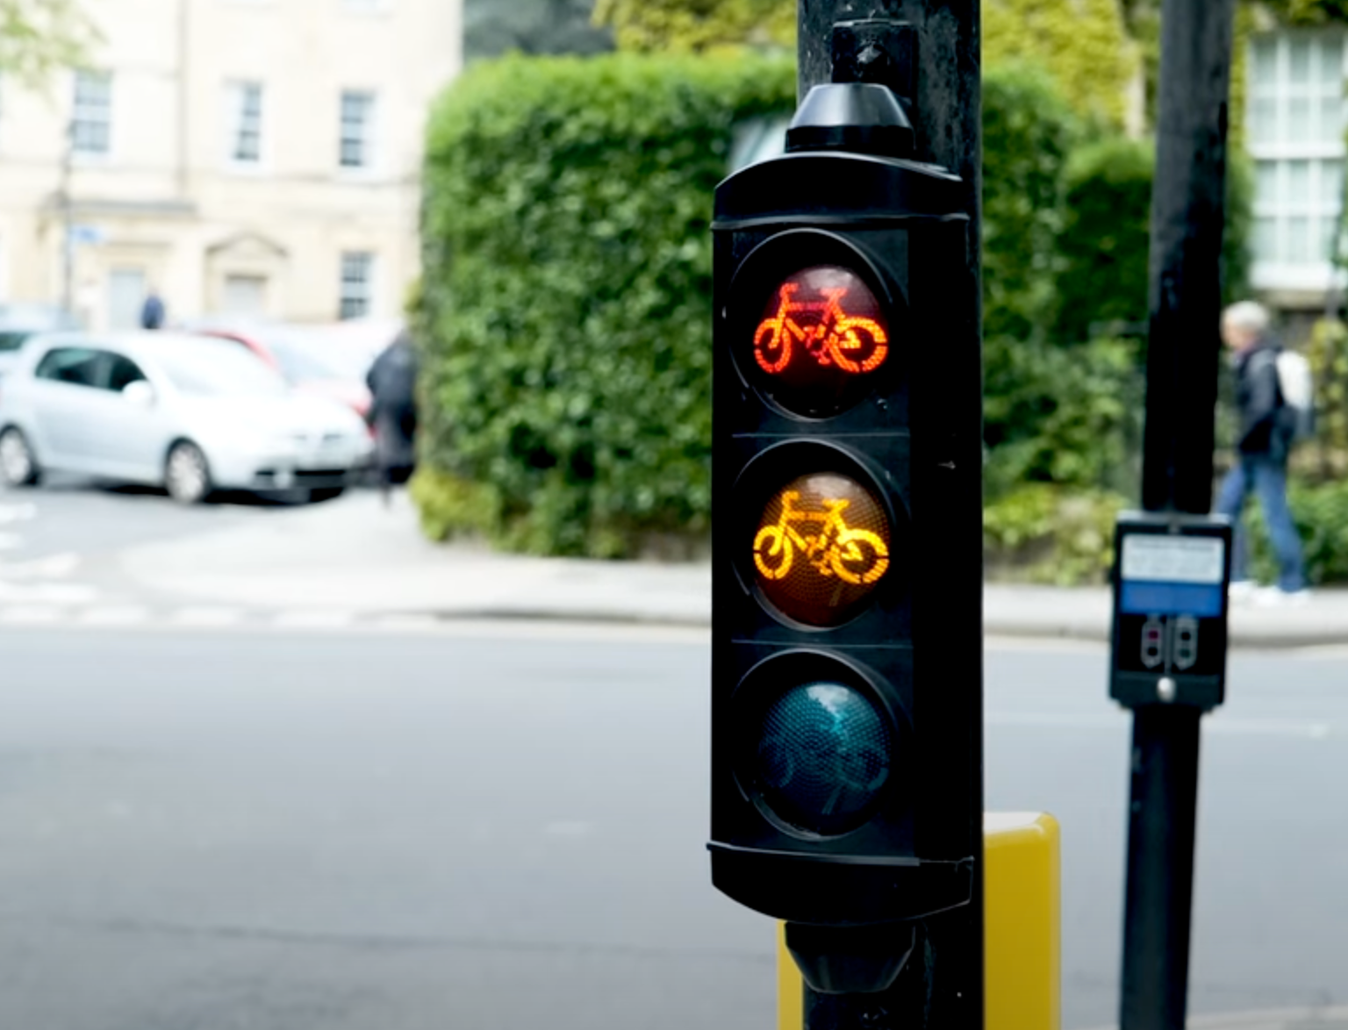 traffic lights for cyclists